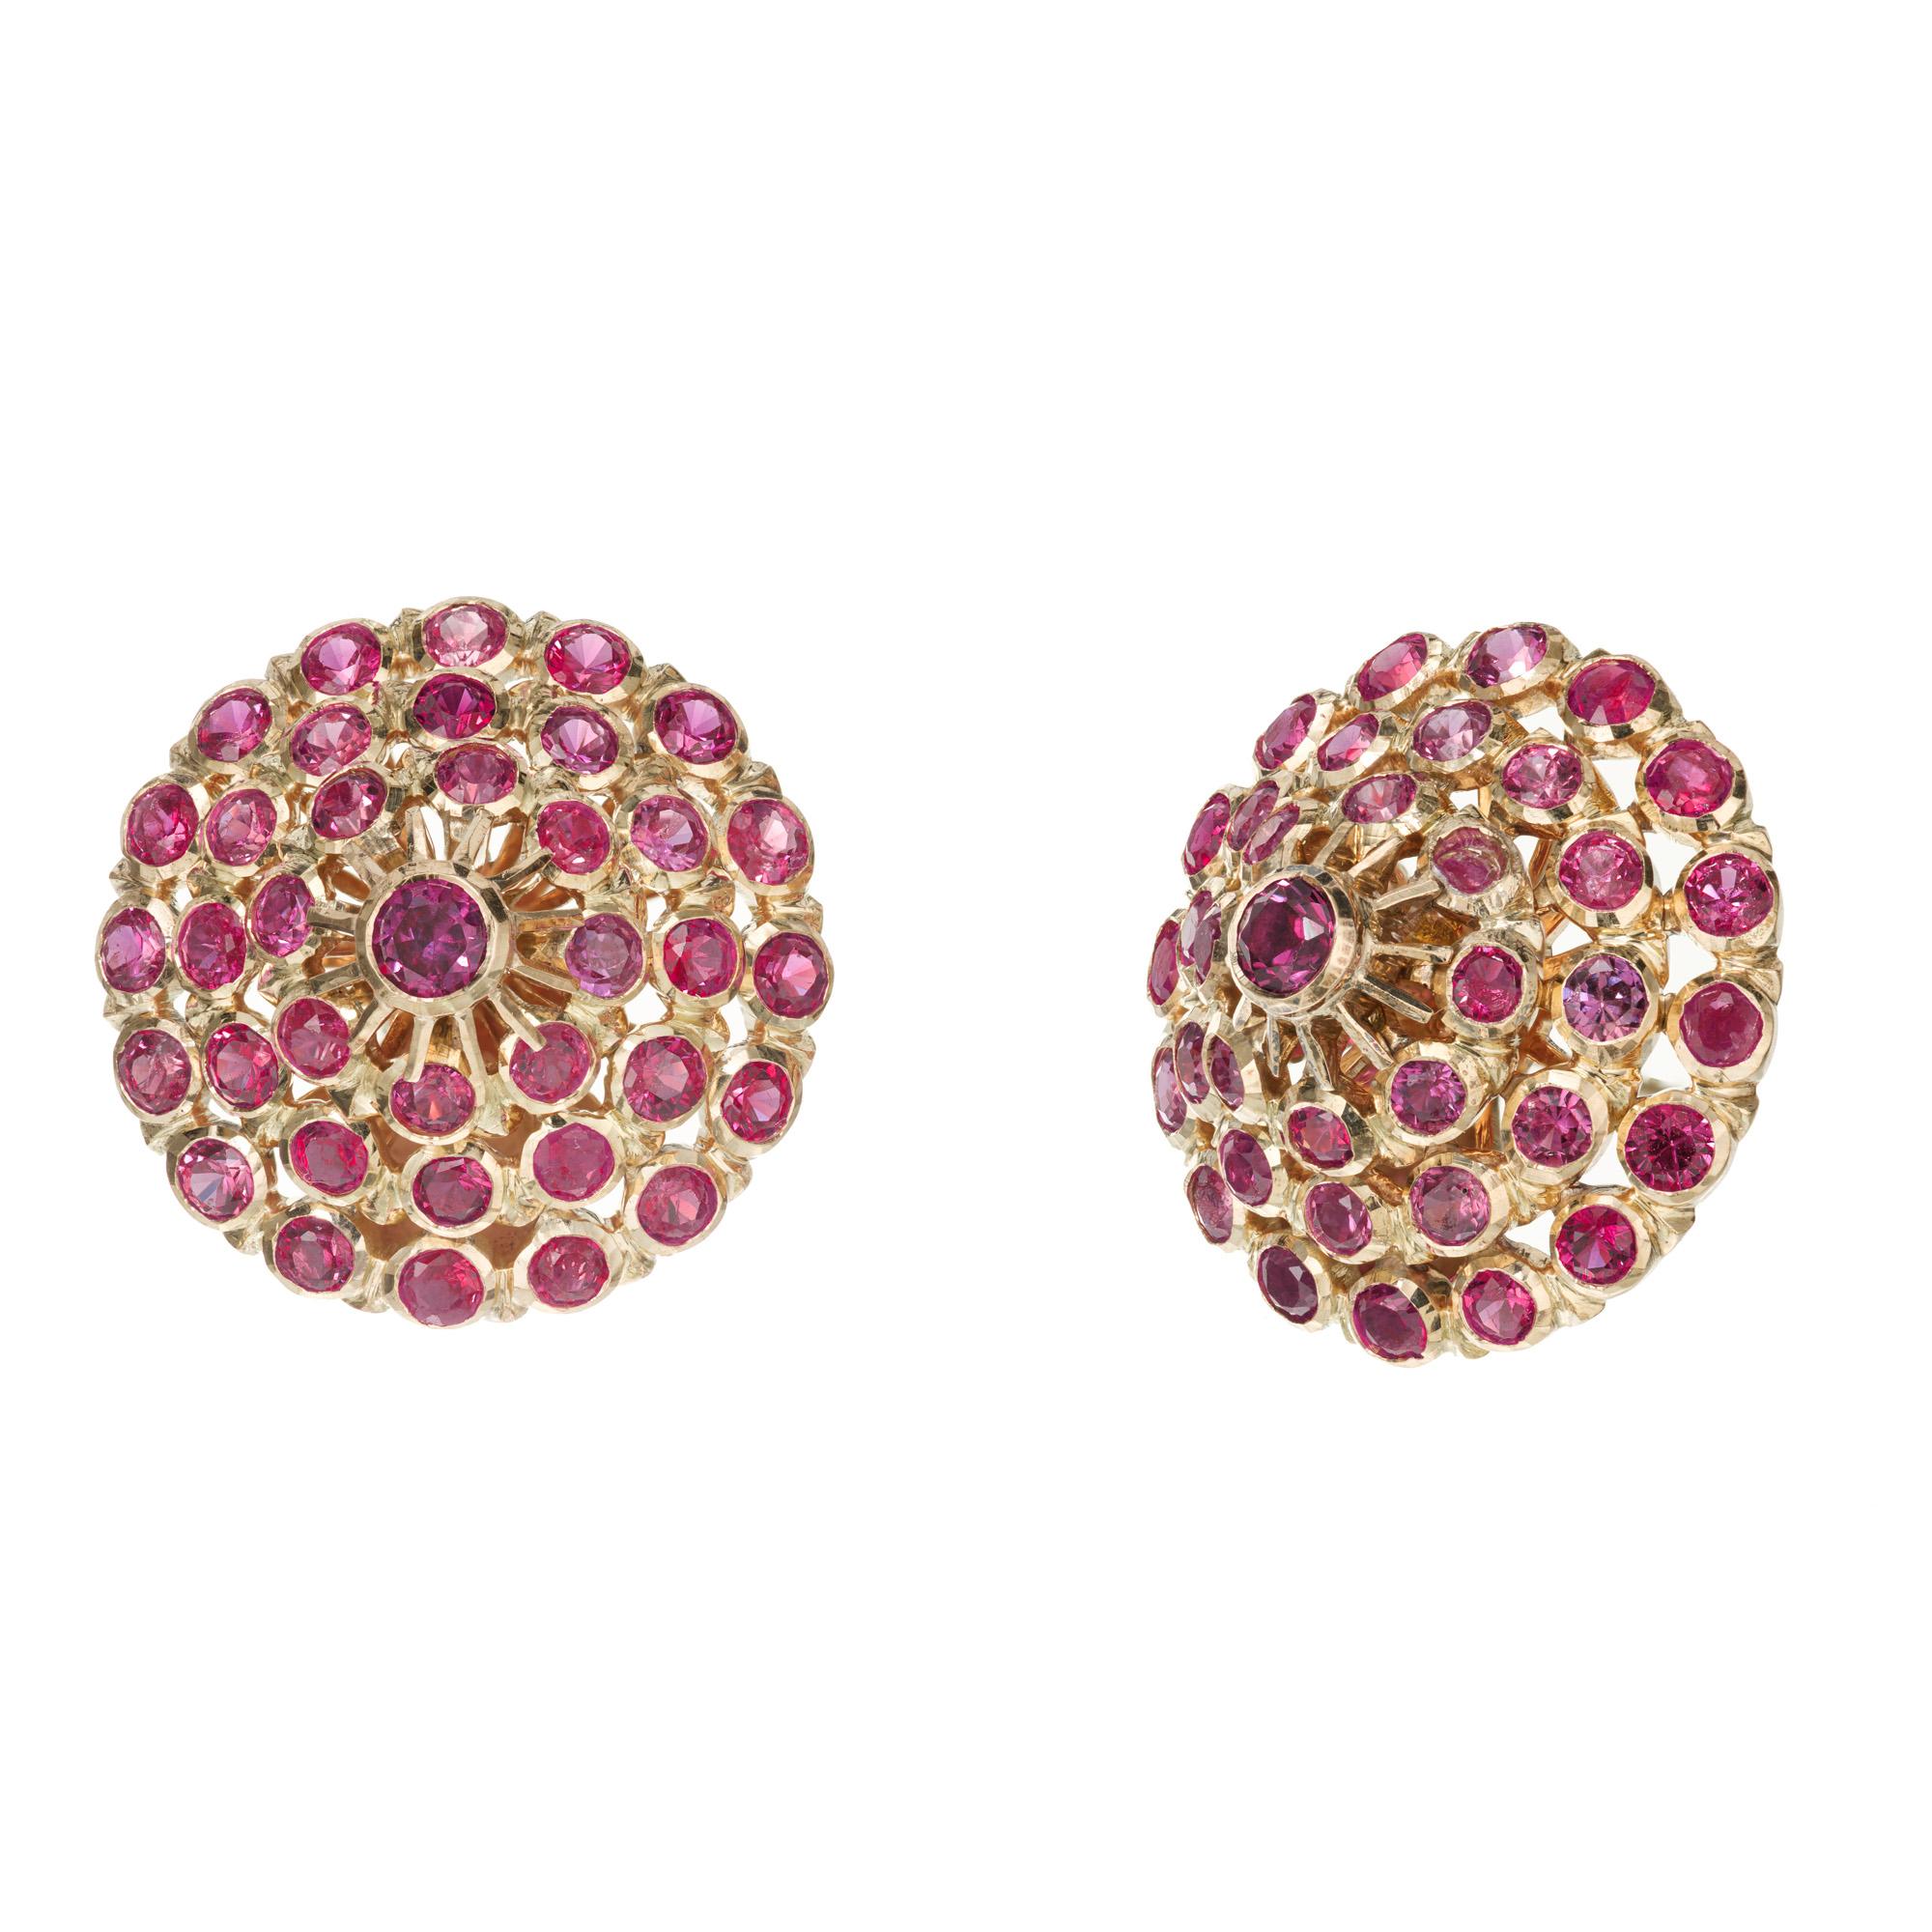 Handmade yellow gold high dome ruby 3-D earrings. GIA certified, 2 round pink/red sapphires with 42 round pink/red natural sapphires set in 14k yellow gold dome settings.  Circa 1950-1960.

2 round pinkish red Sapphires, approx. total weight .30cts,